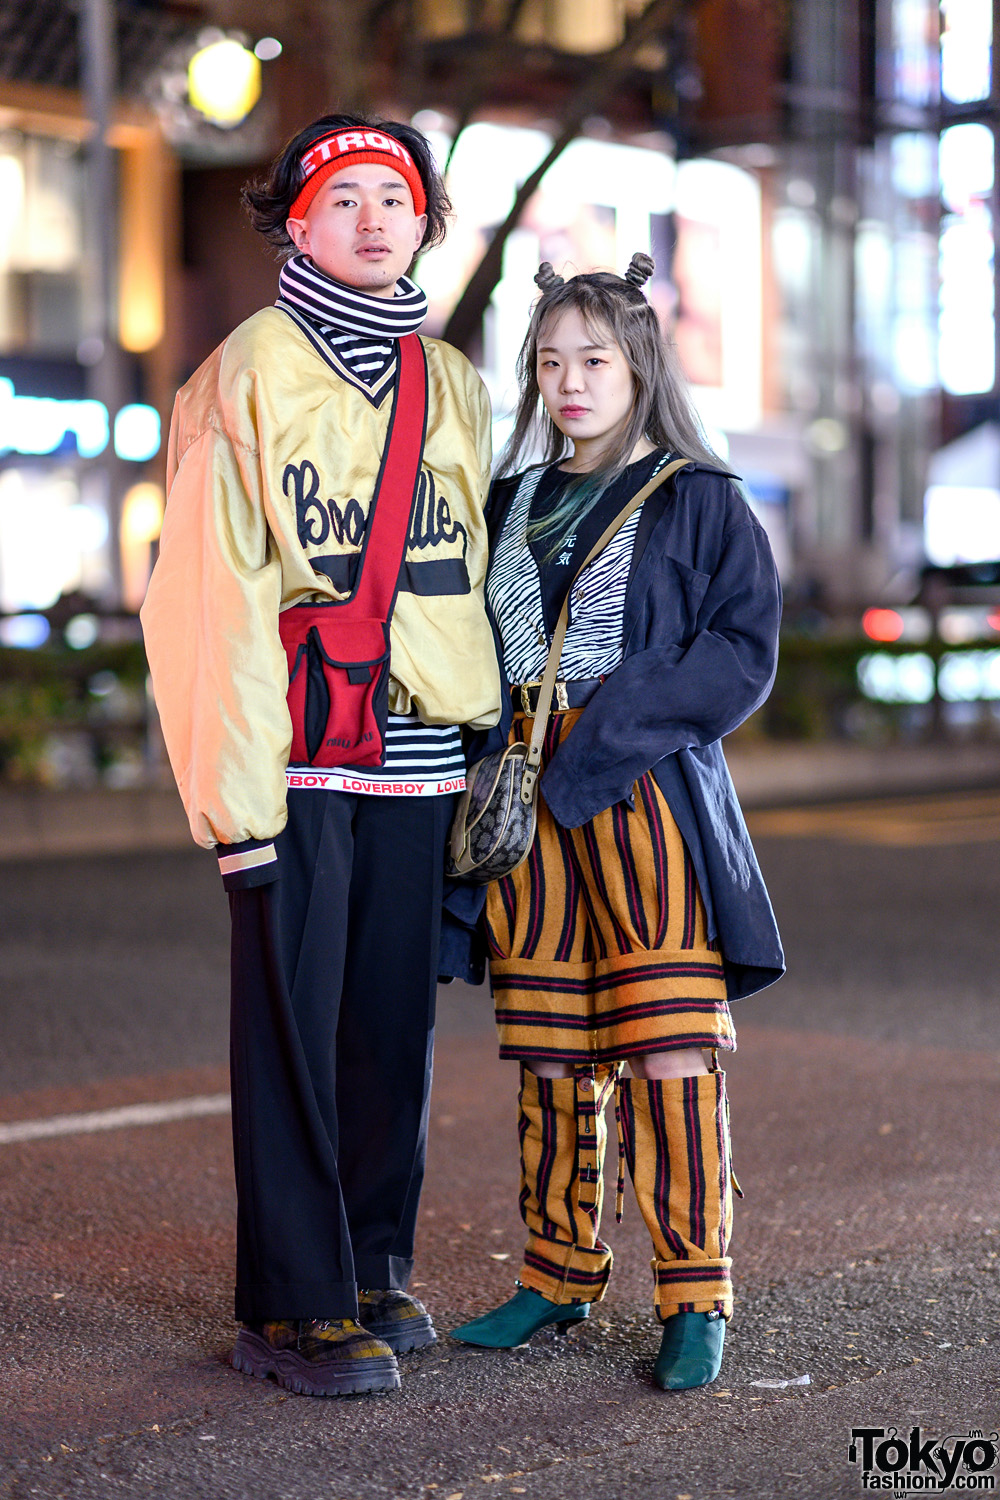 Japanese Eclectic Street Styles w/ Charles Jeffrey Loverboy